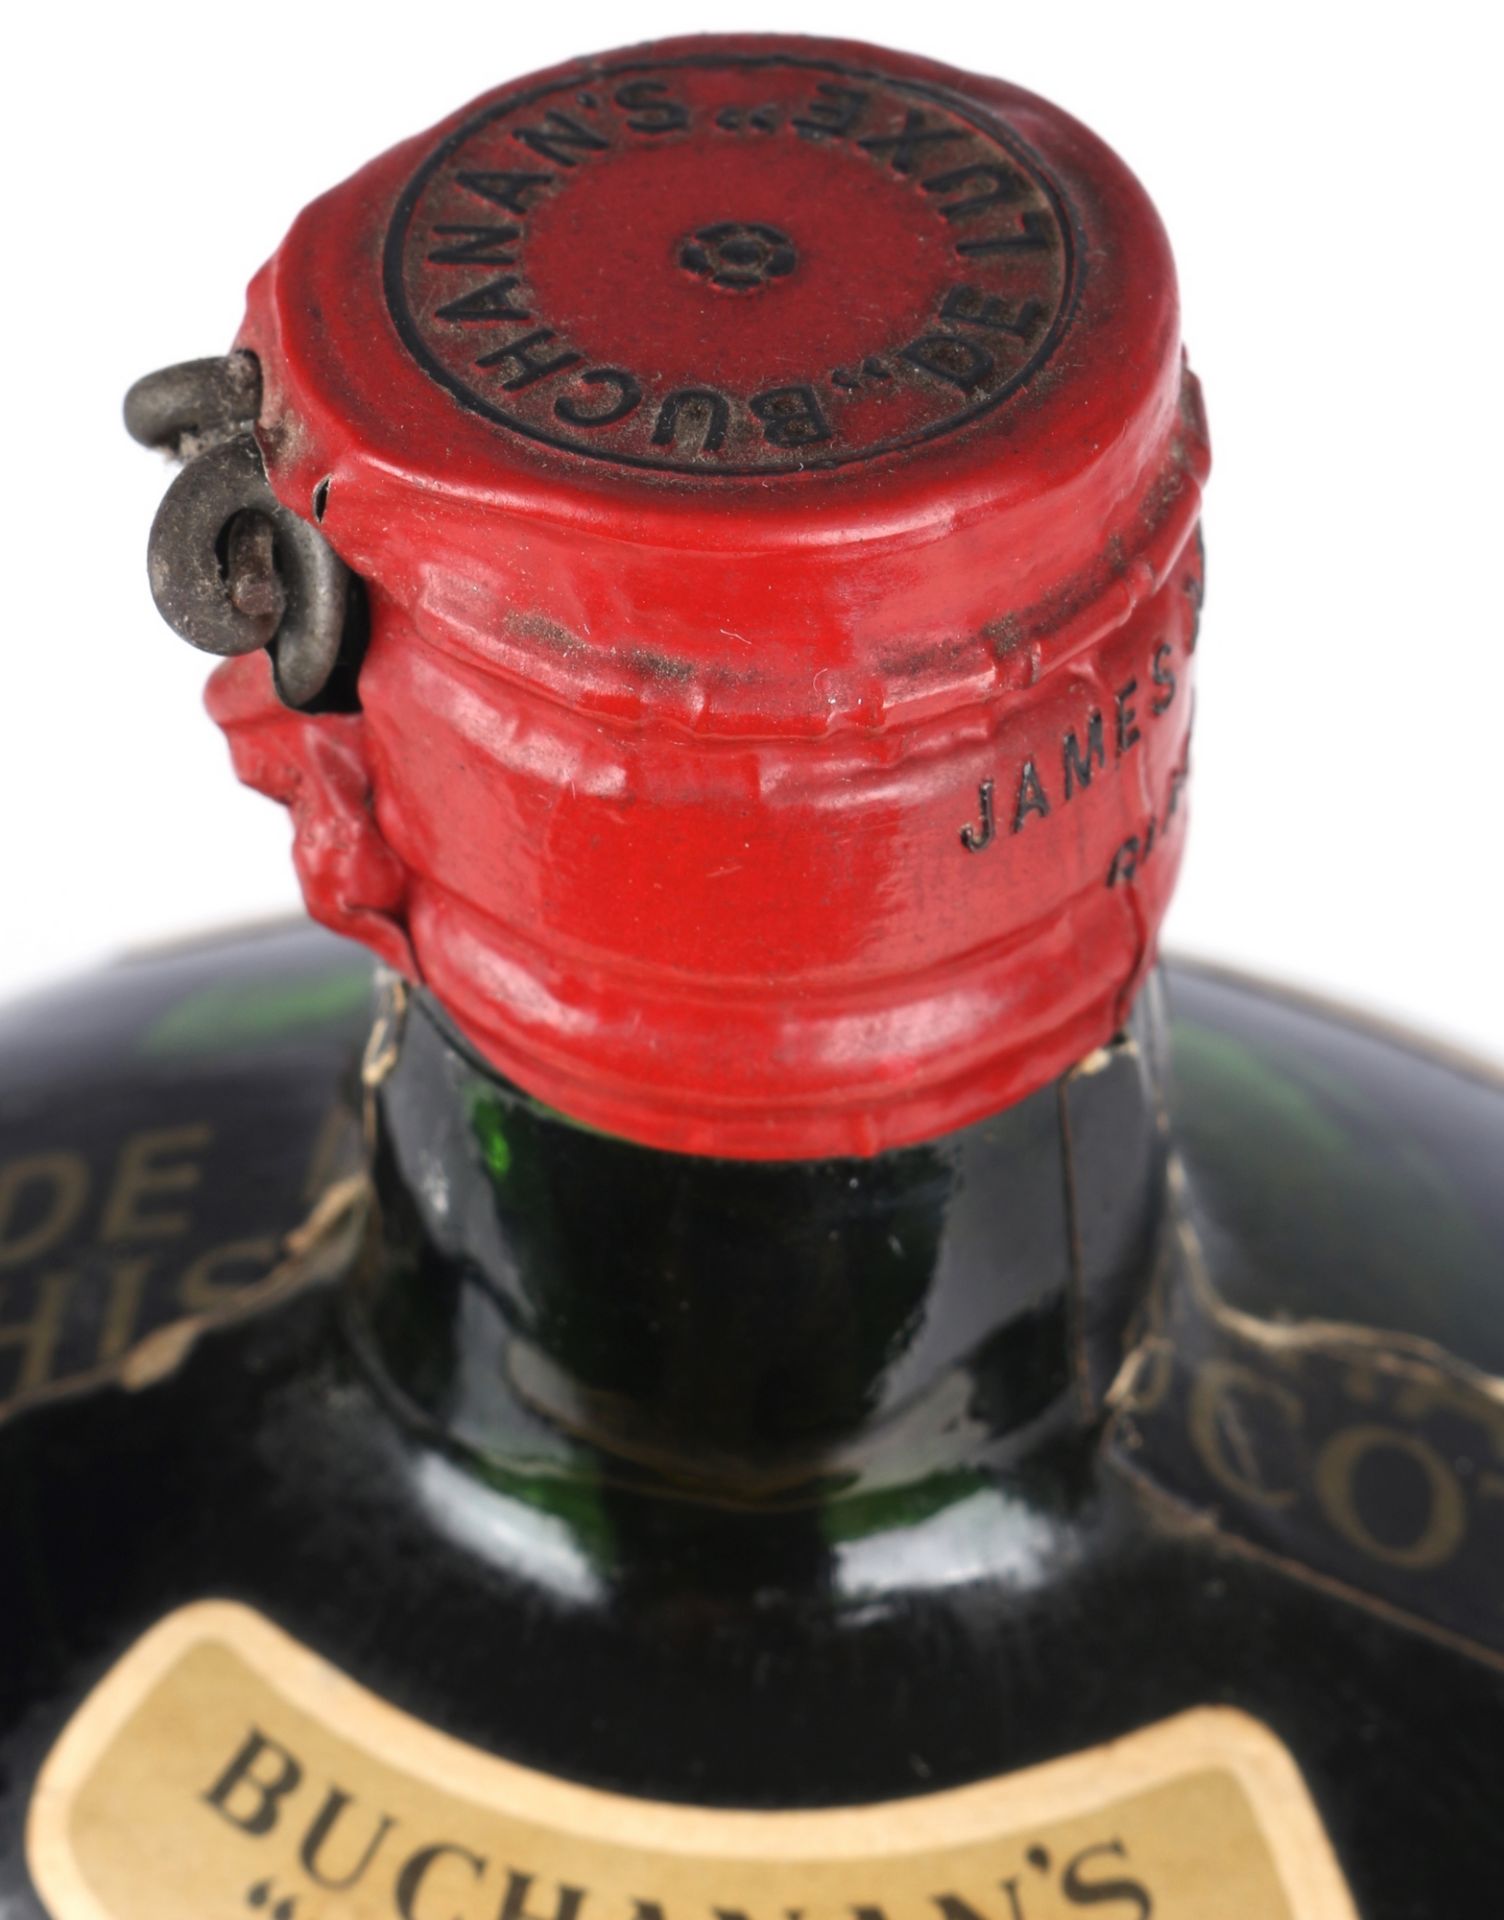 Buchanan's De Luxe Blended Scotch Whisky - Image 4 of 5